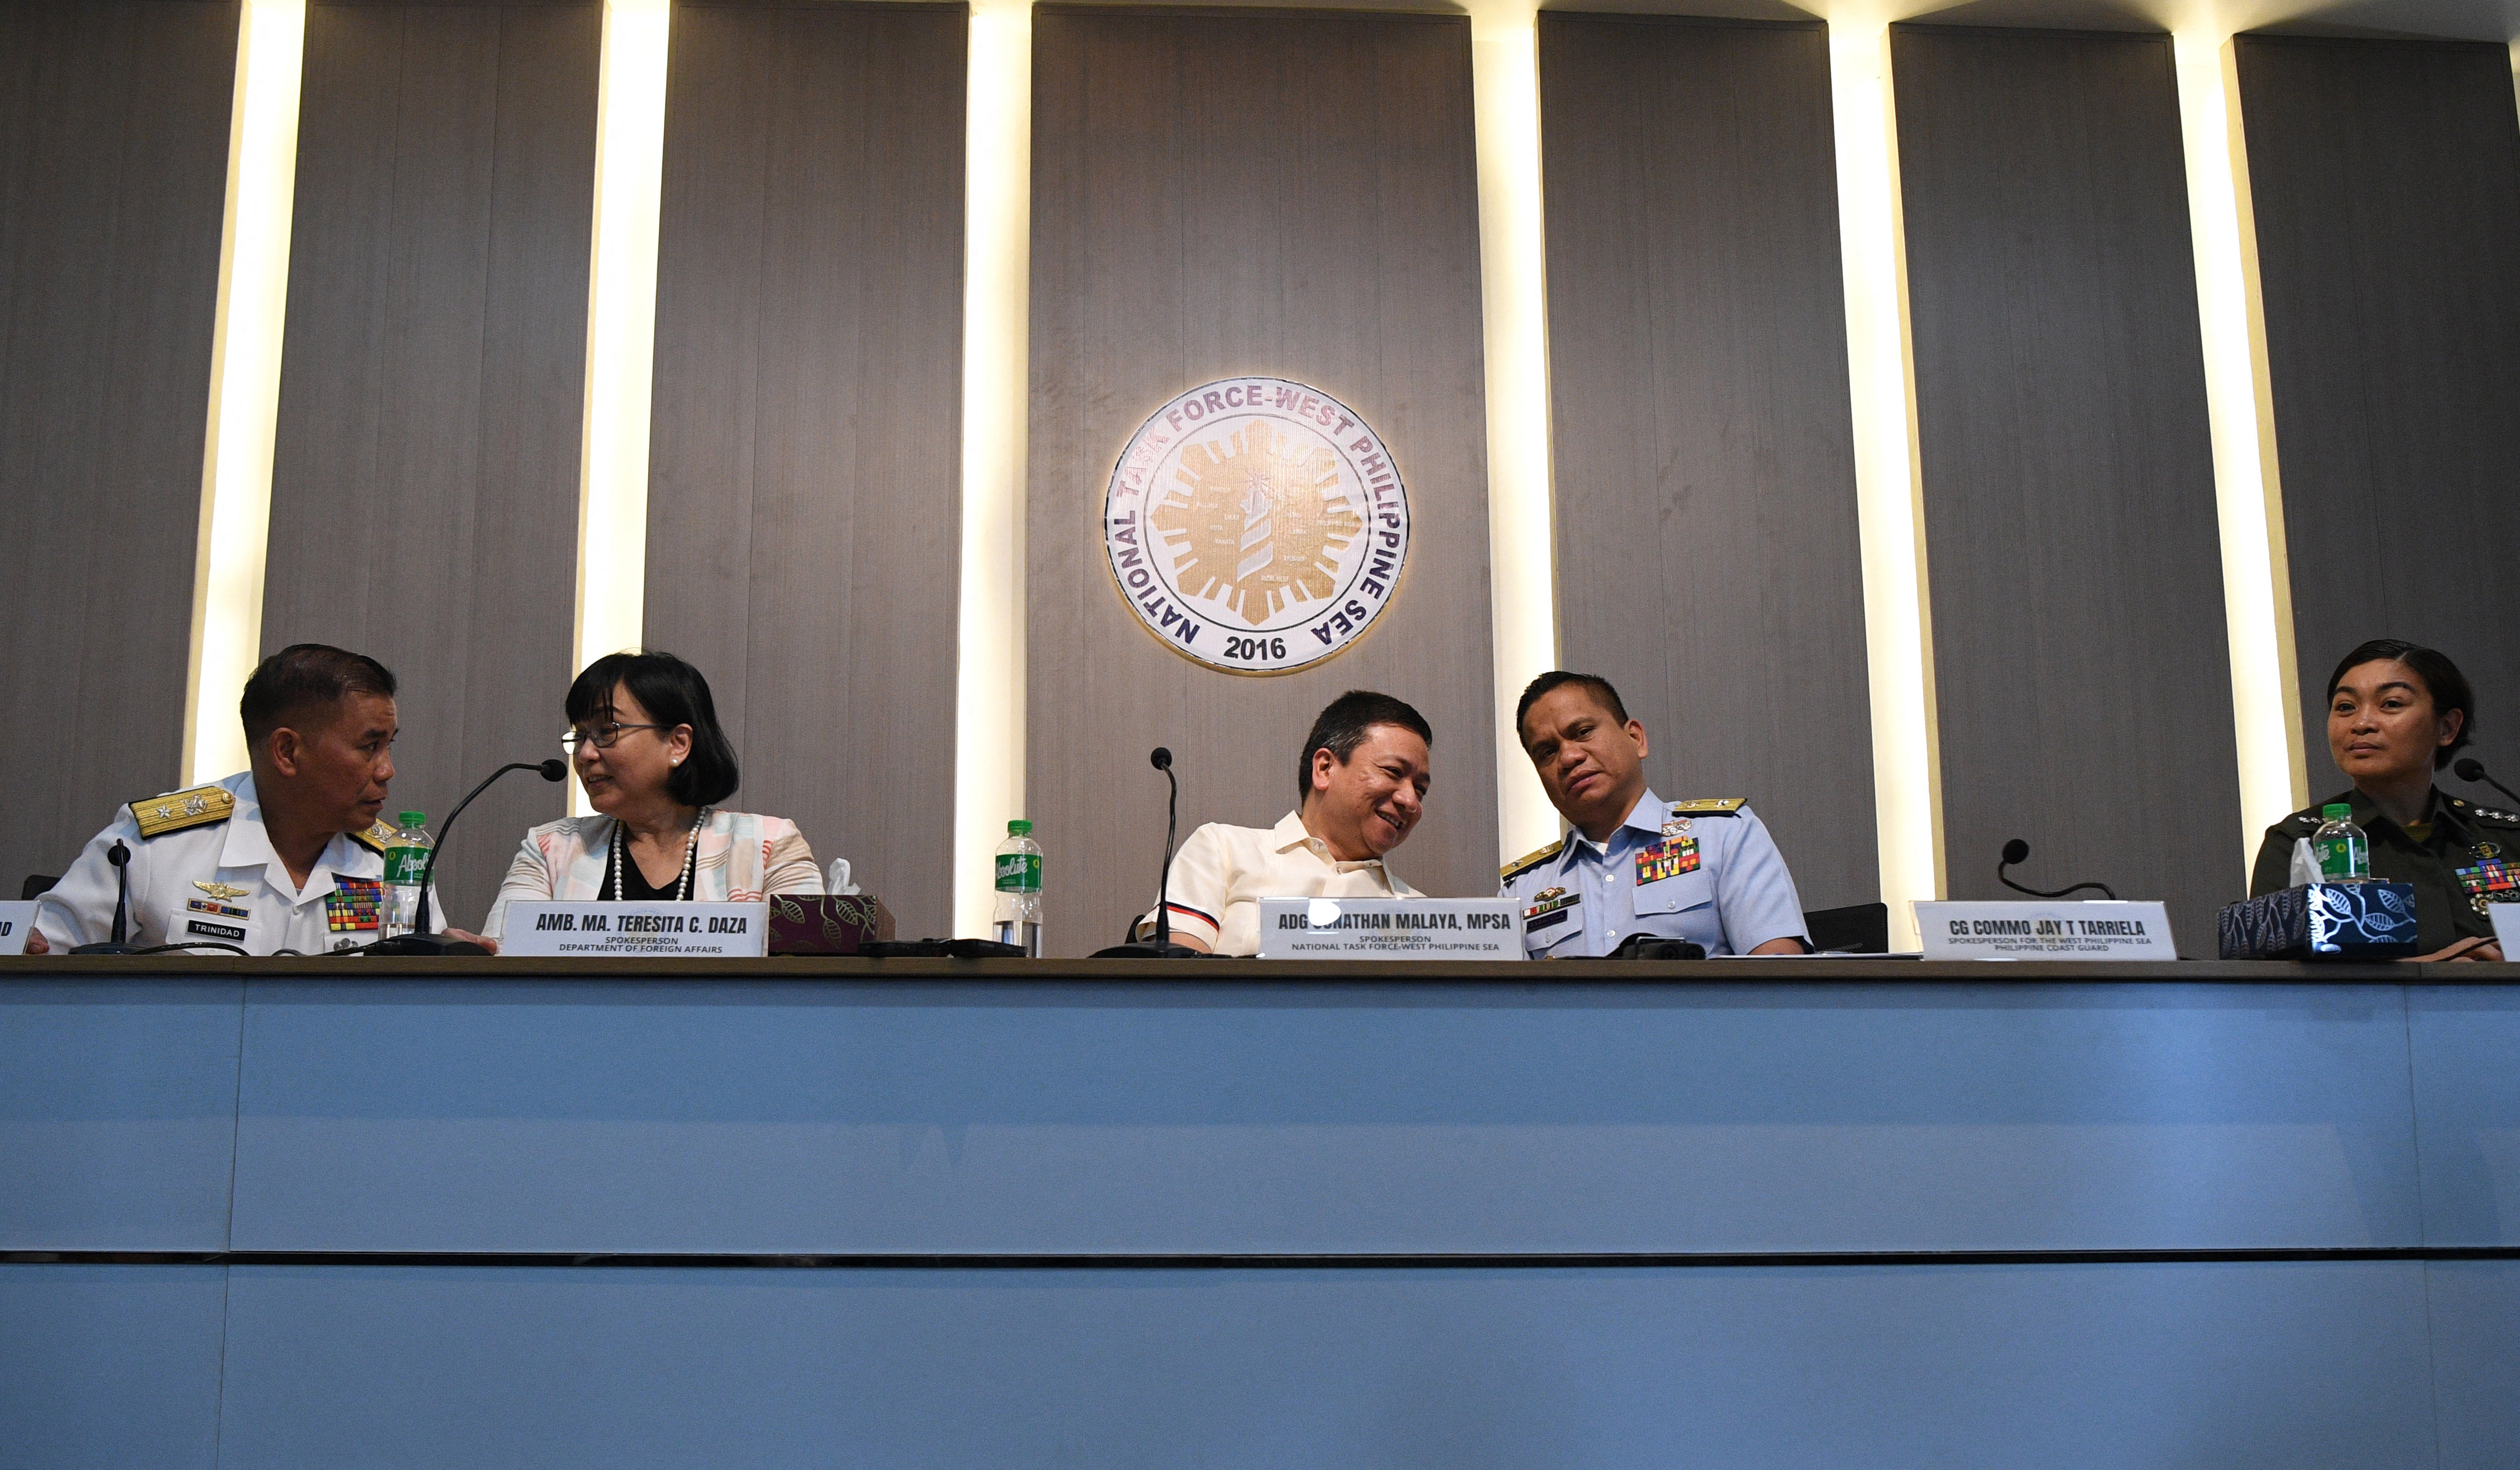 (L-R) Commodore Roy Trinidad,Philippine Navy spokesperson for the West Philippine Sea, Ambassador Teresita Daza, spokesperson of the Philippine Department of Foreign Affairs, Philippine National security Council Assistant Director General Jonathan Malaya, Philippine Commodore Jay Tarriela, Coast Guard spokesperson for the West Philippine Sea, and Colonel Francel Padilla, spokesperson for the Philippine Military, attend a joint press conference in Manila on March 6, 2024. The Philippines said on March 5 that China Coast Guard vessels caused two collisions with Philippine boats and water cannoned one of them, leaving four crew injured during a resupply mission in the South China Sea